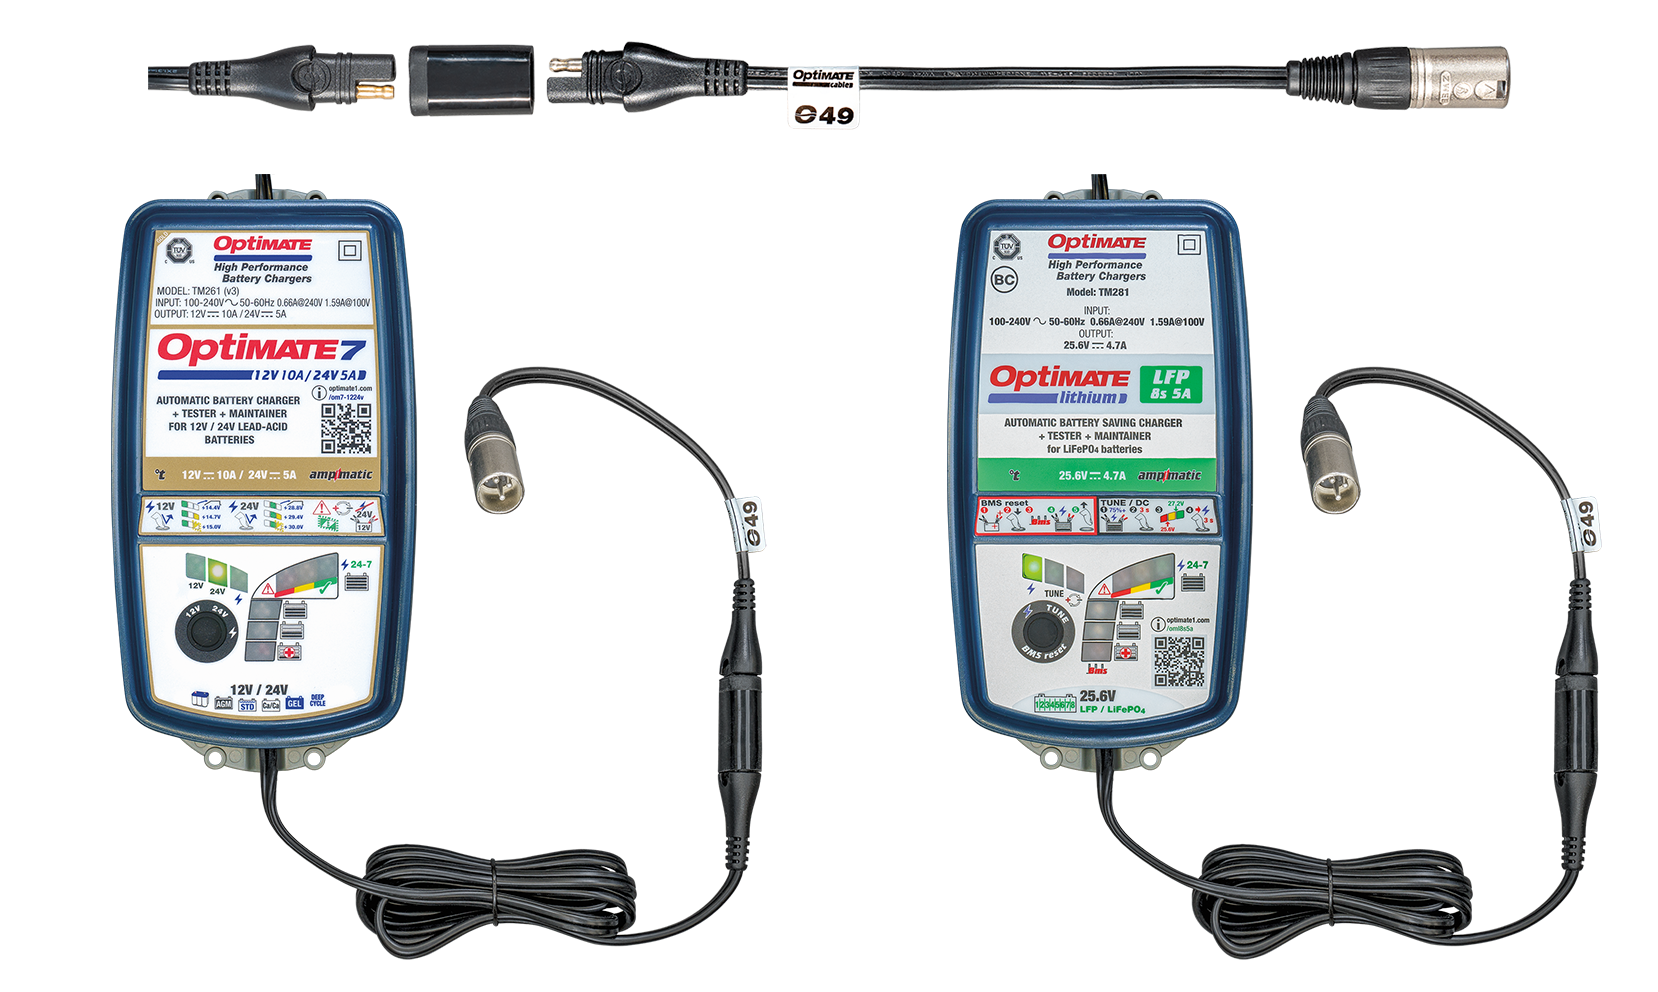 Prepare your OptiMate 24V battery charger to connect to your medical equipment with our O-49 xlr plug